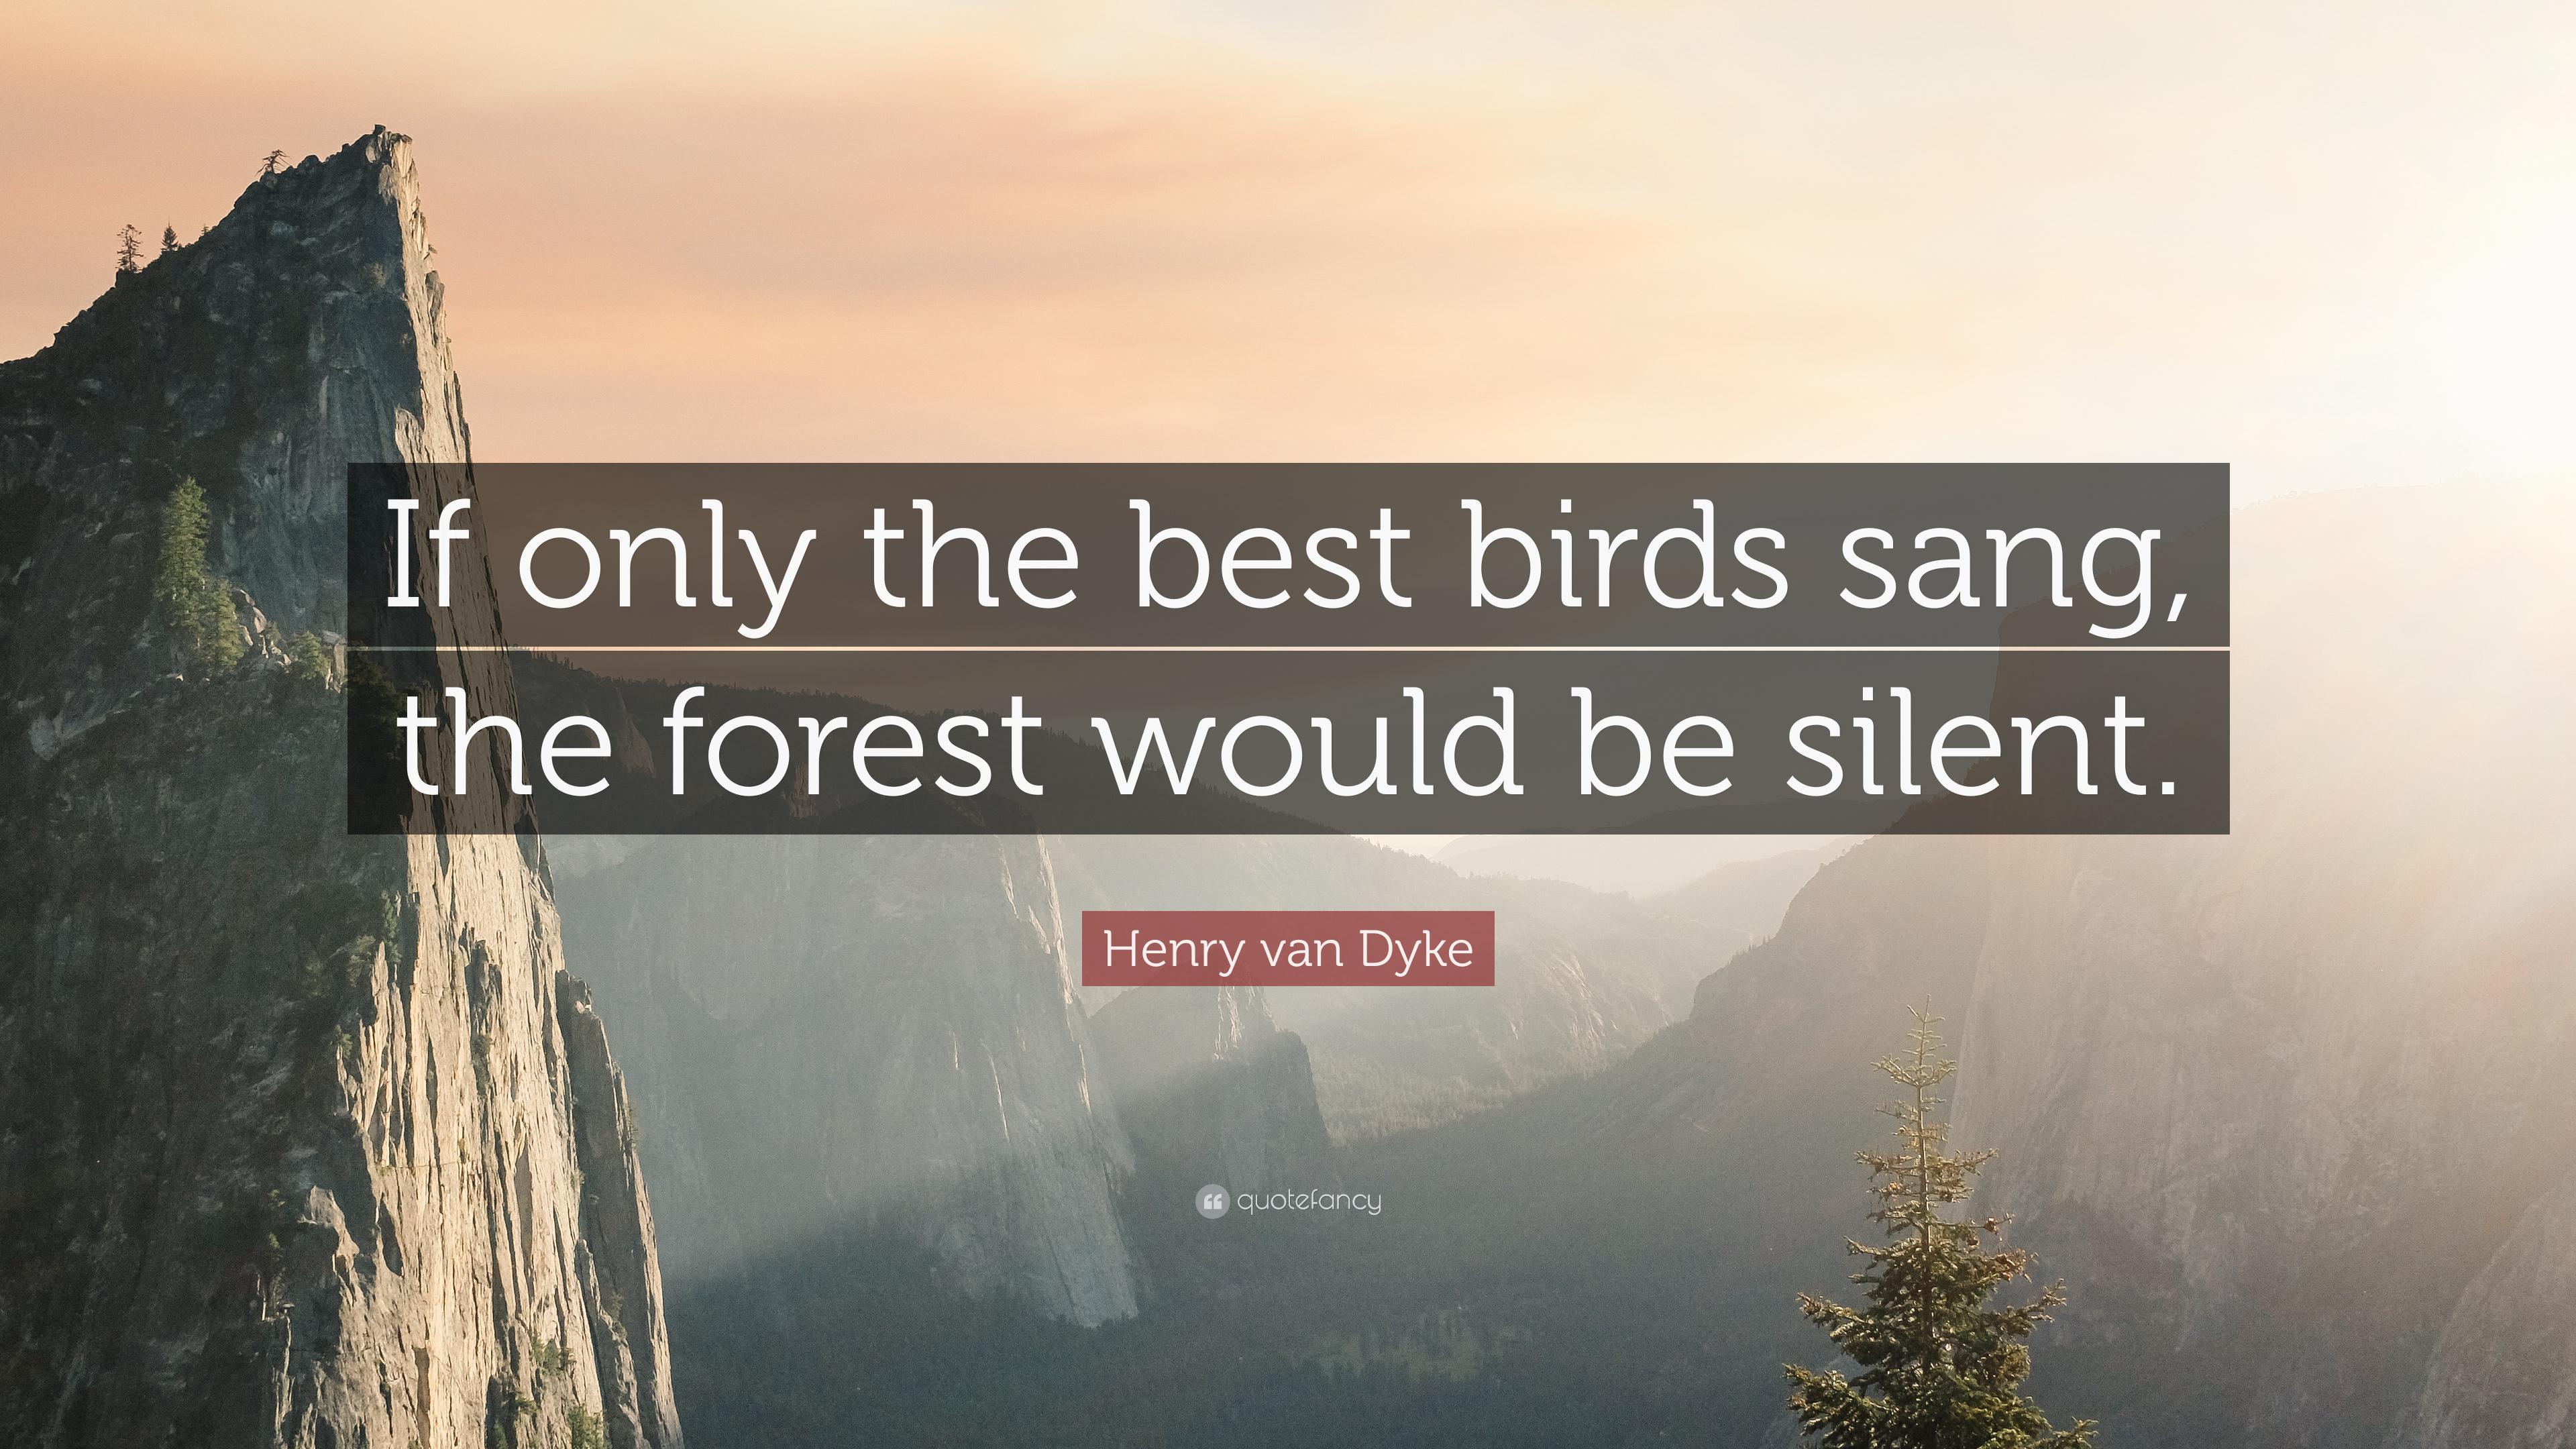 Henry van Dyke Quote: “If only the best birds sang, the forest would